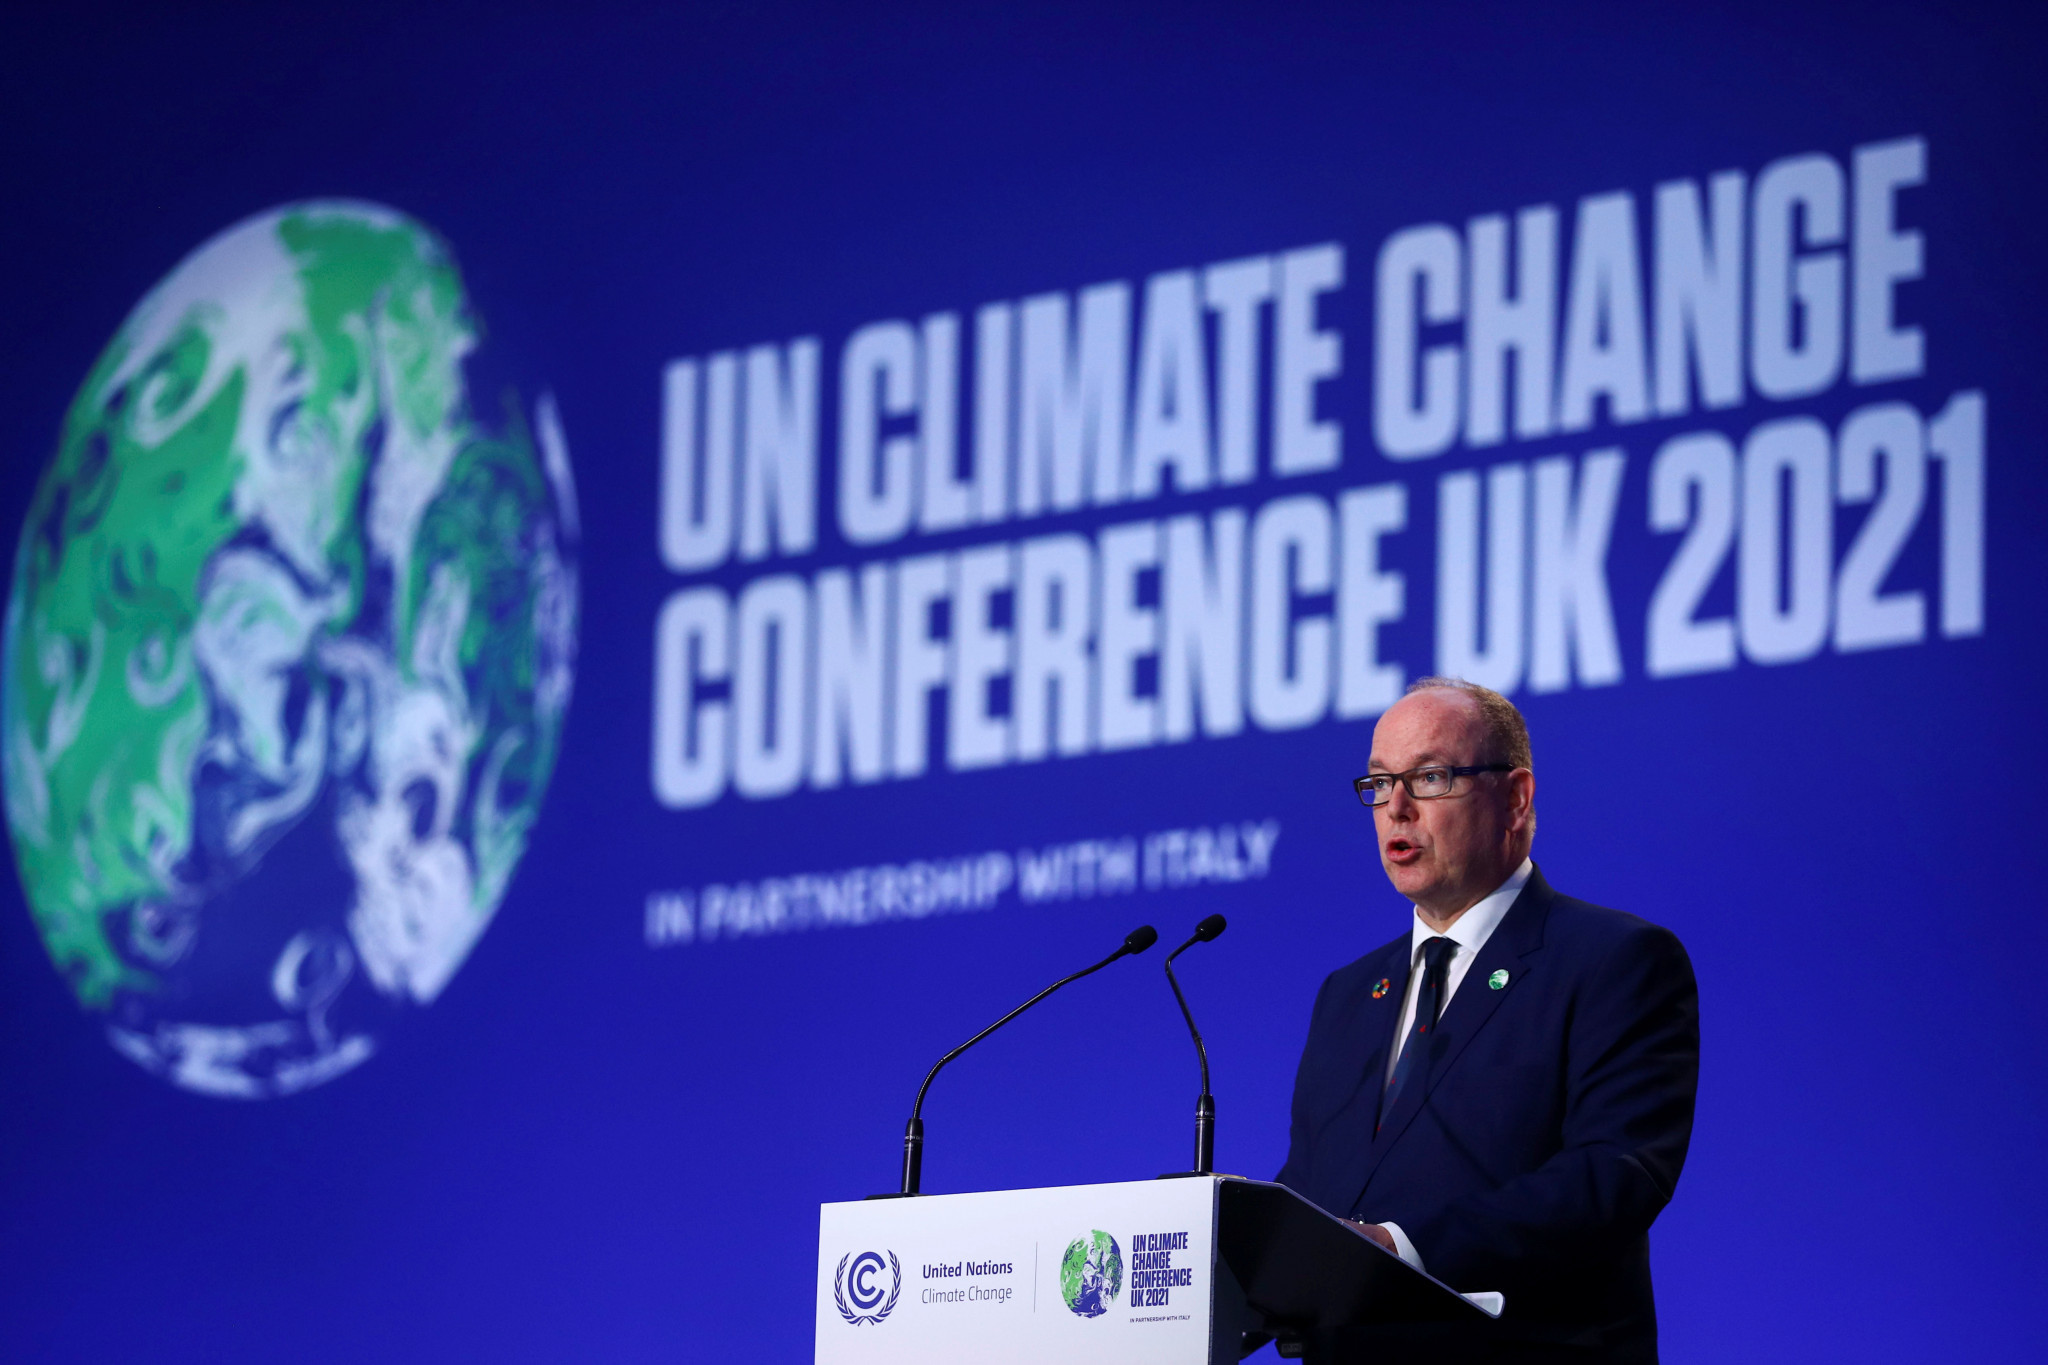 Prince Albert calls for more sporting organisations to commit to climate action in speech at COP26